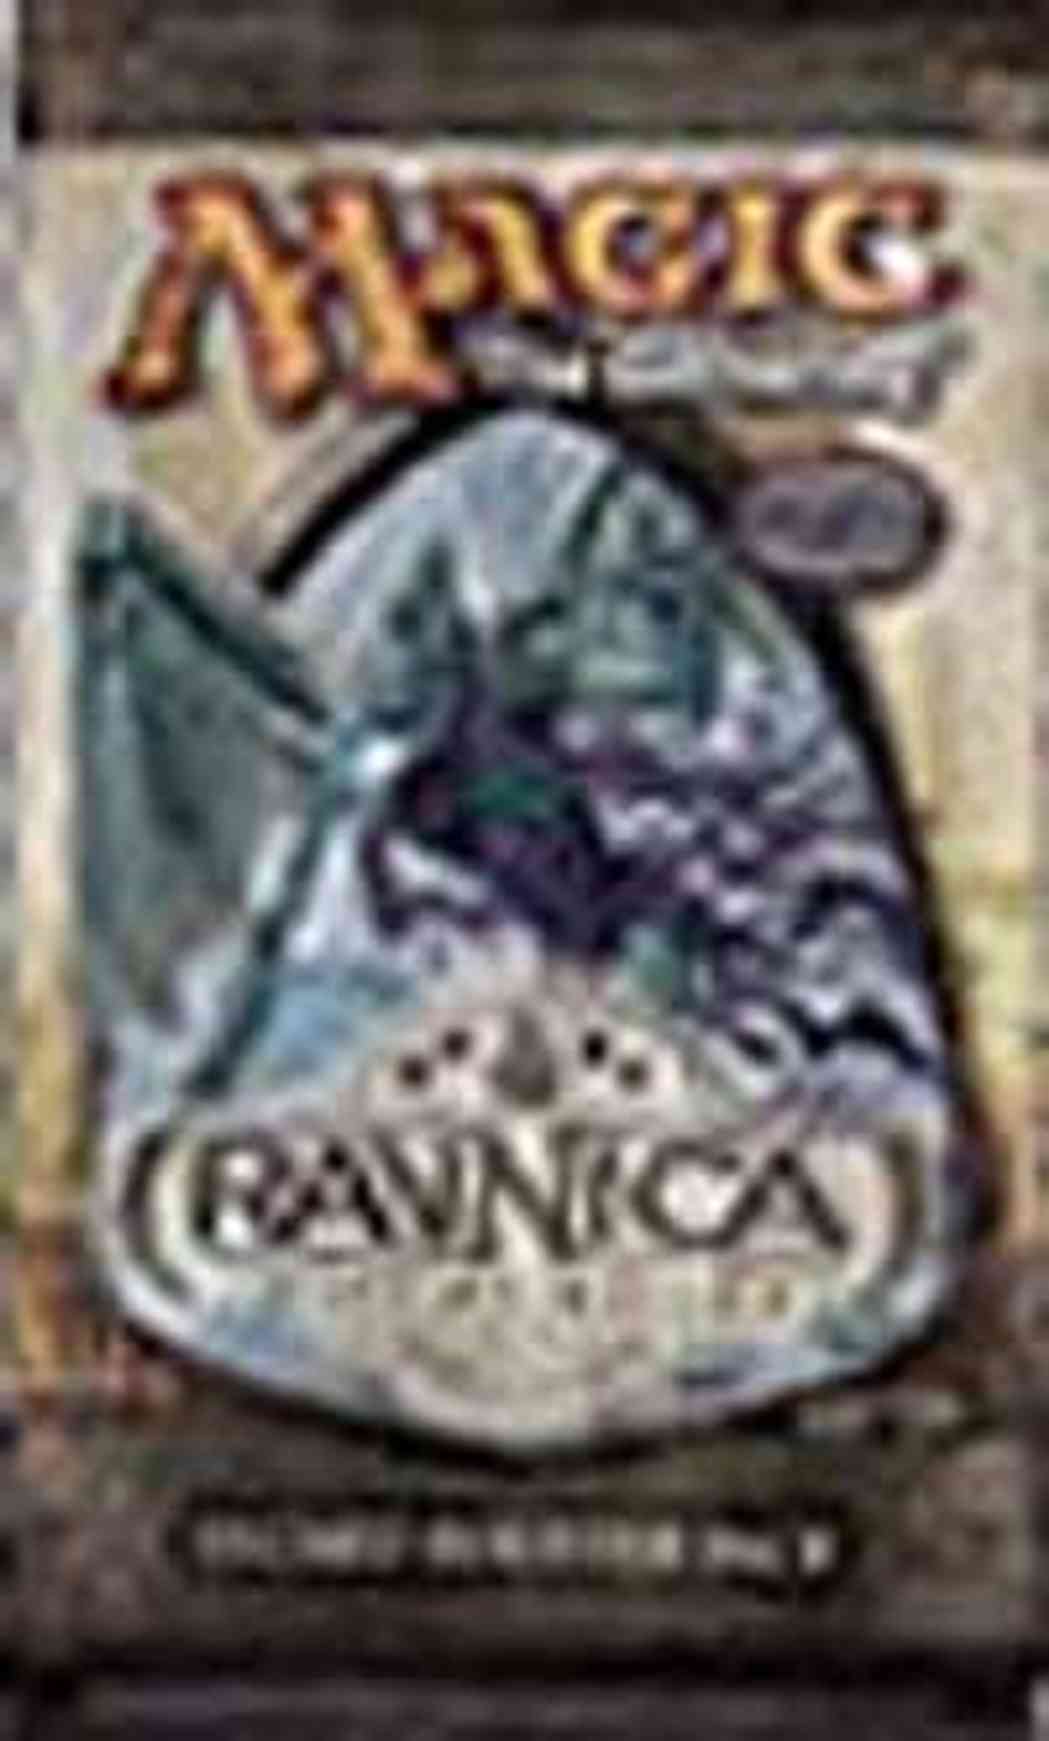 Ravnica - Booster Pack magic card front